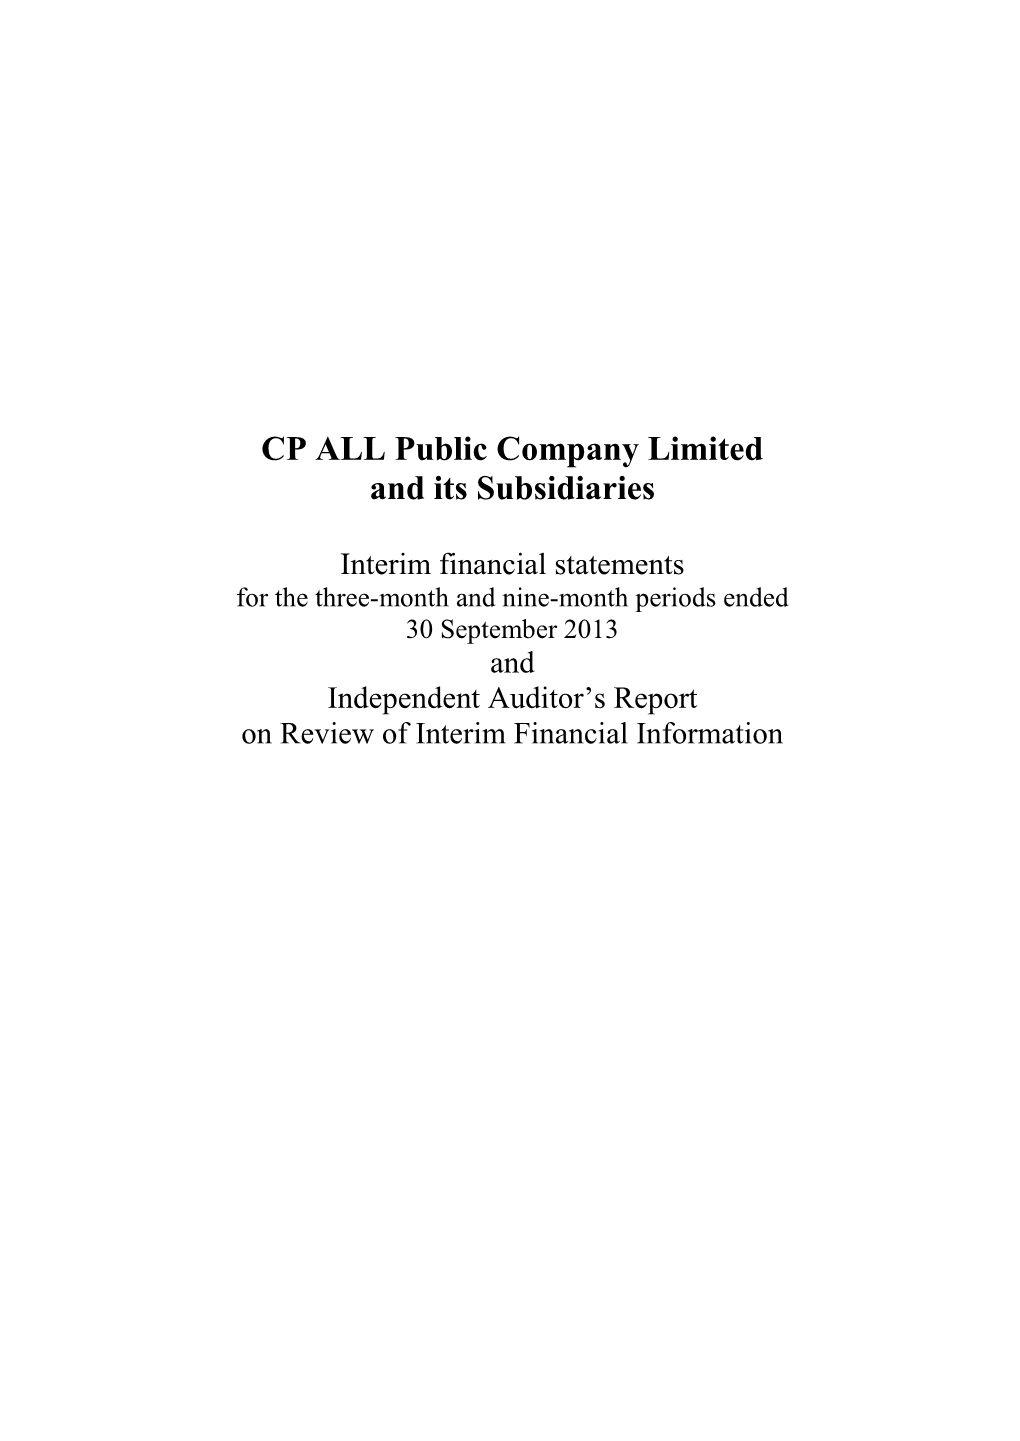 CP ALL Public Company Limited and Its Subsidiaries